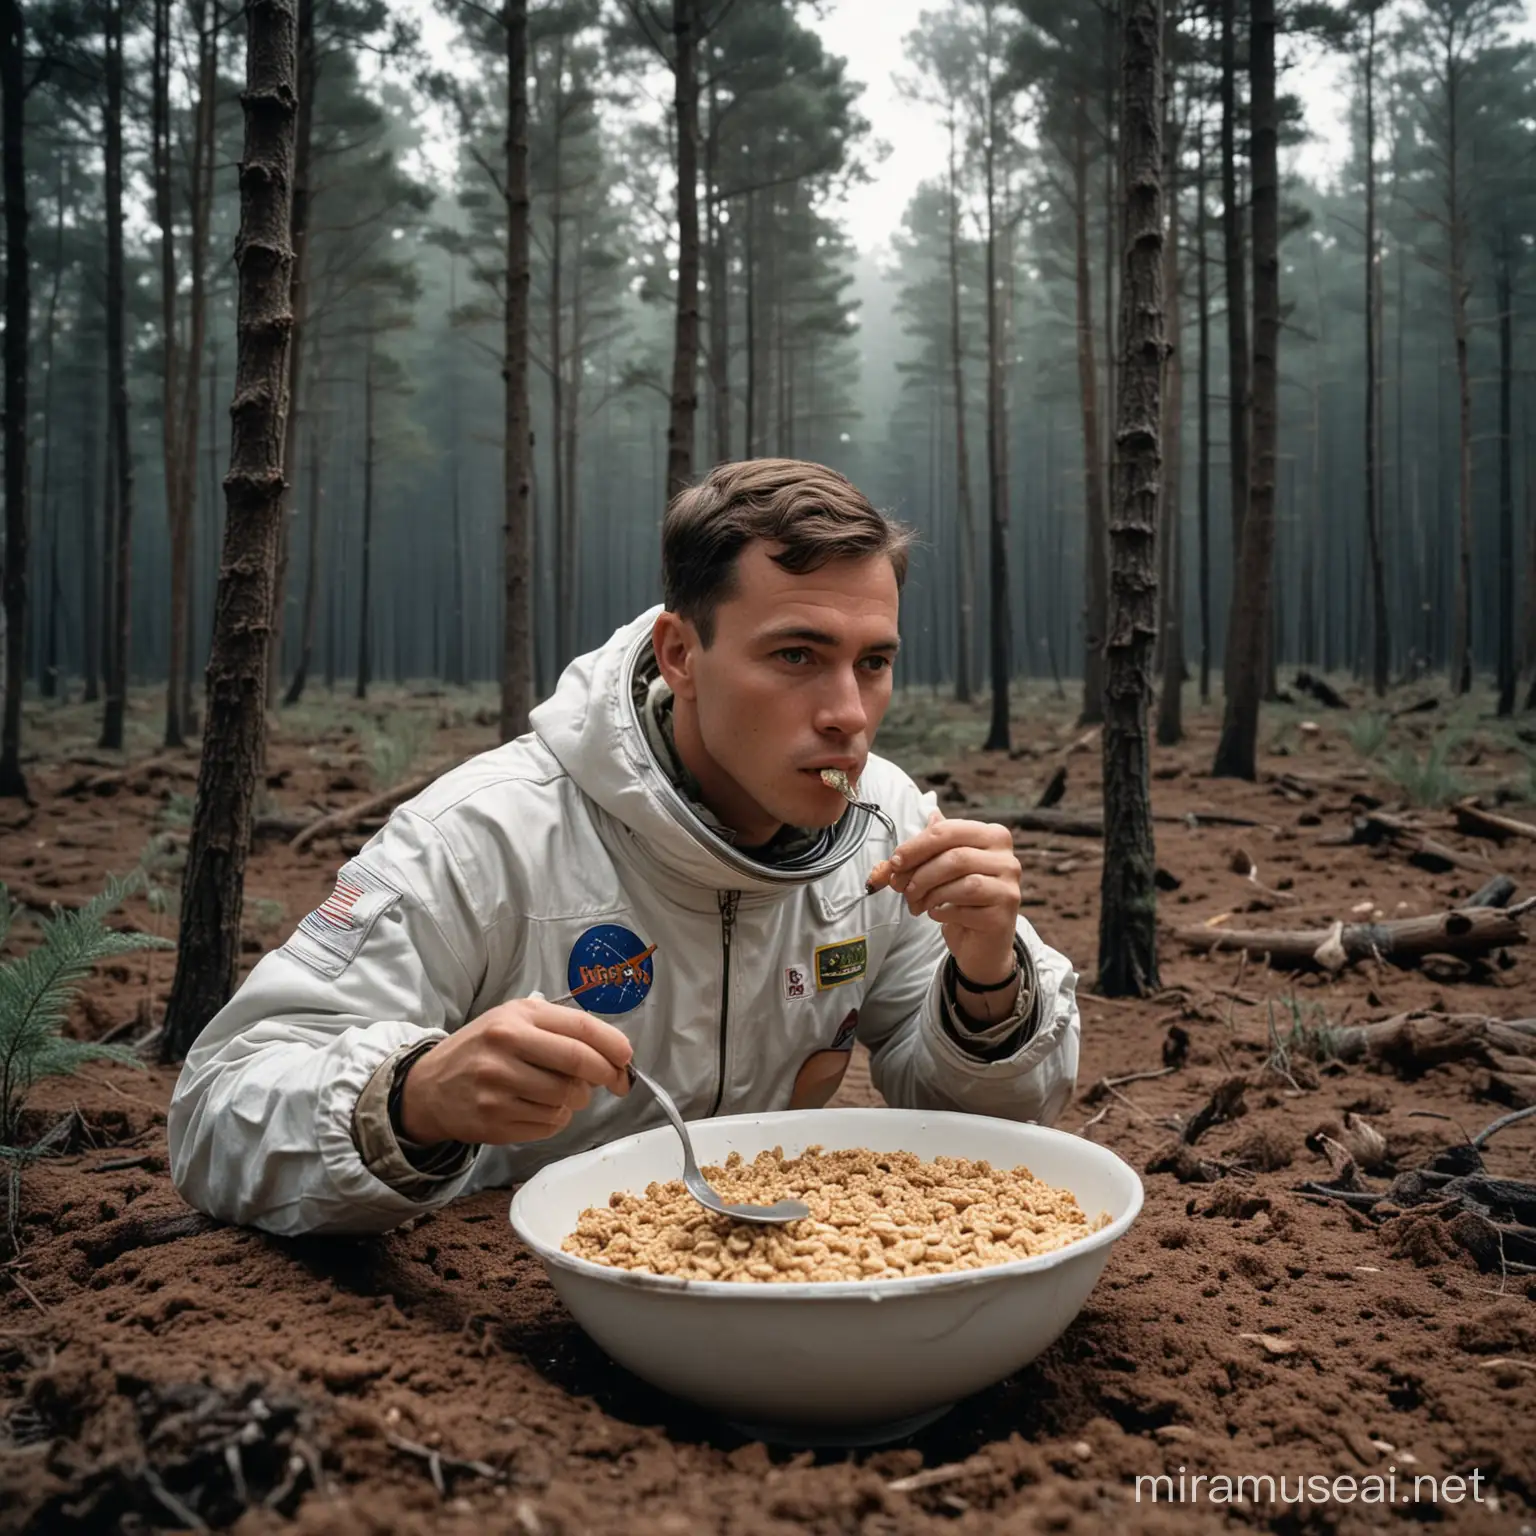  eating cereals in a forest on the moon